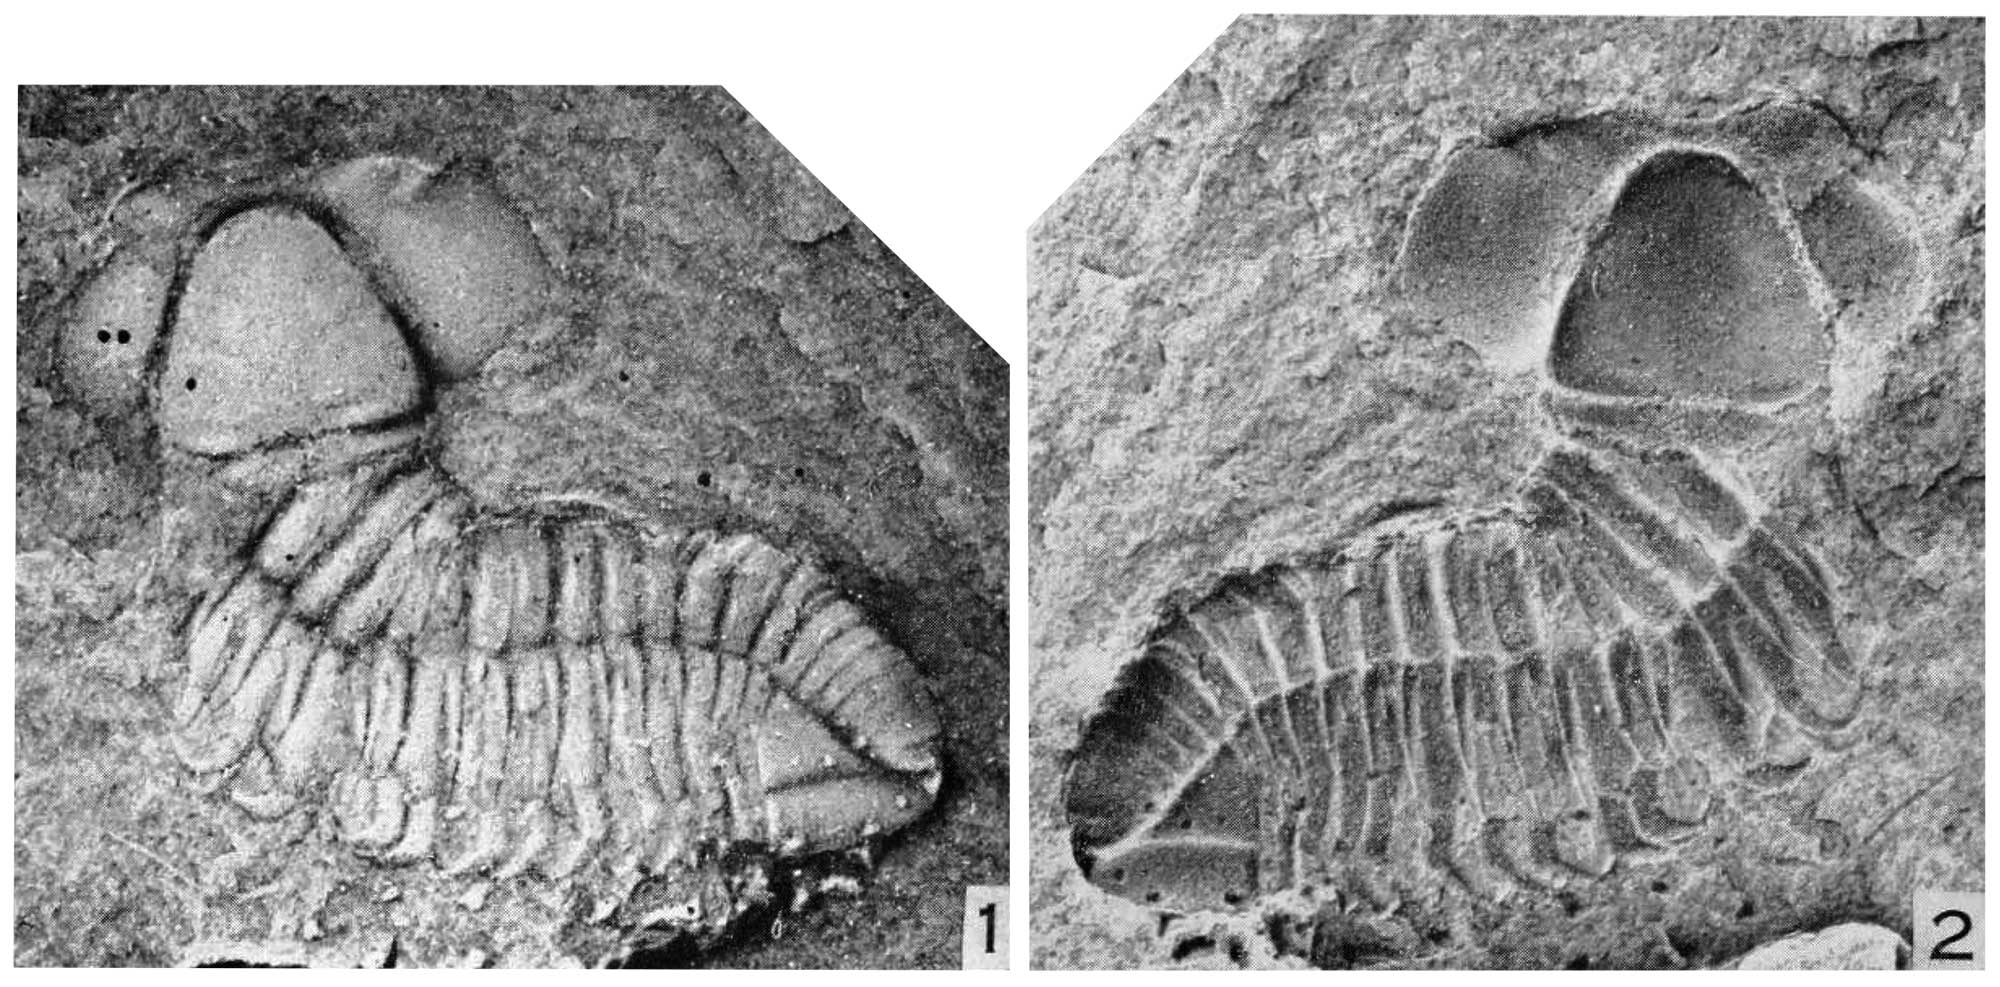 Two photographs of Florida's only known trilobite fossils, Plaesiacomia exsul.